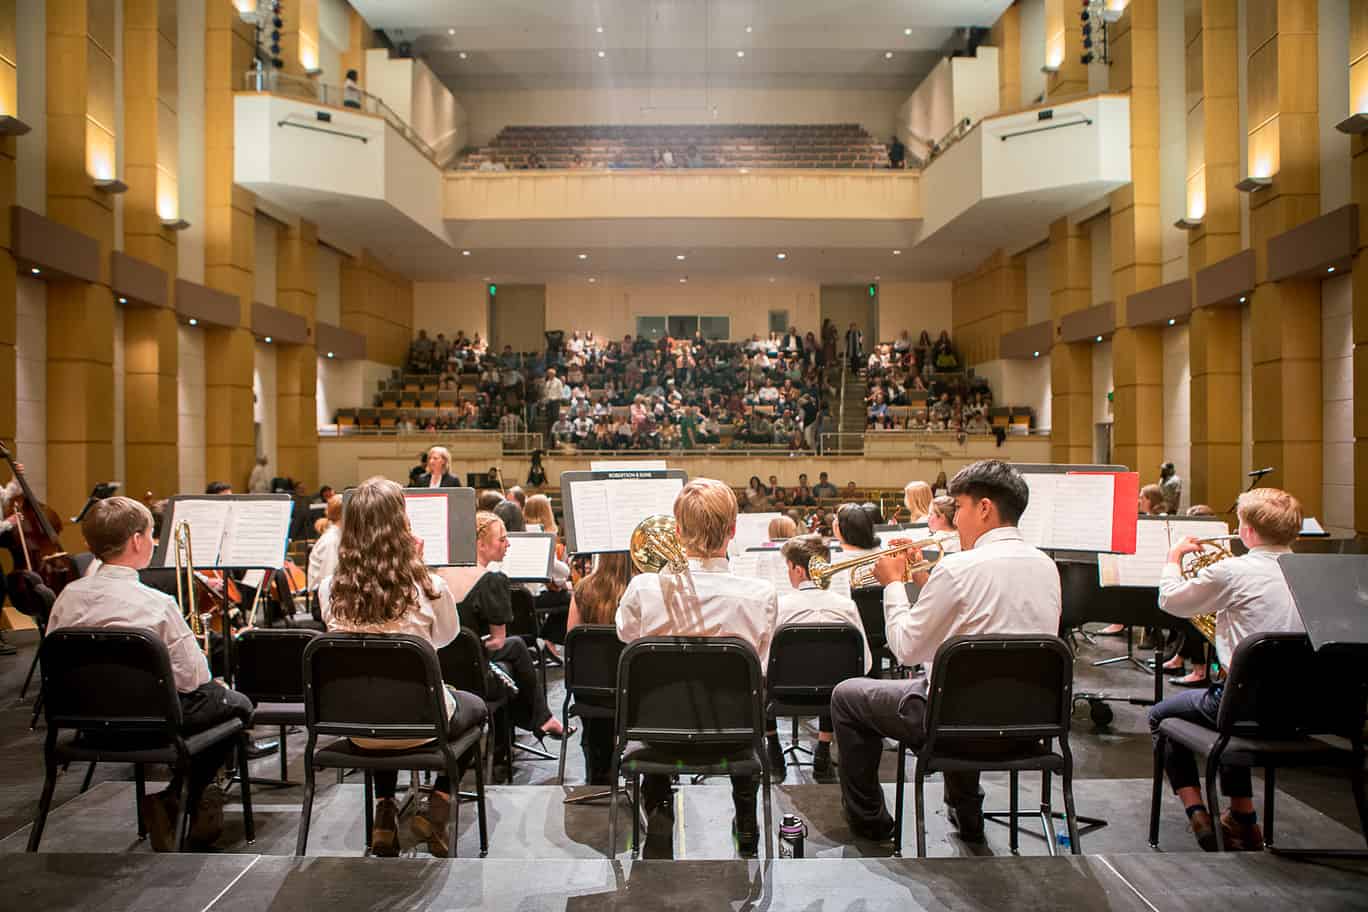 Photo behind youth musicians on stage, looking out at the audience